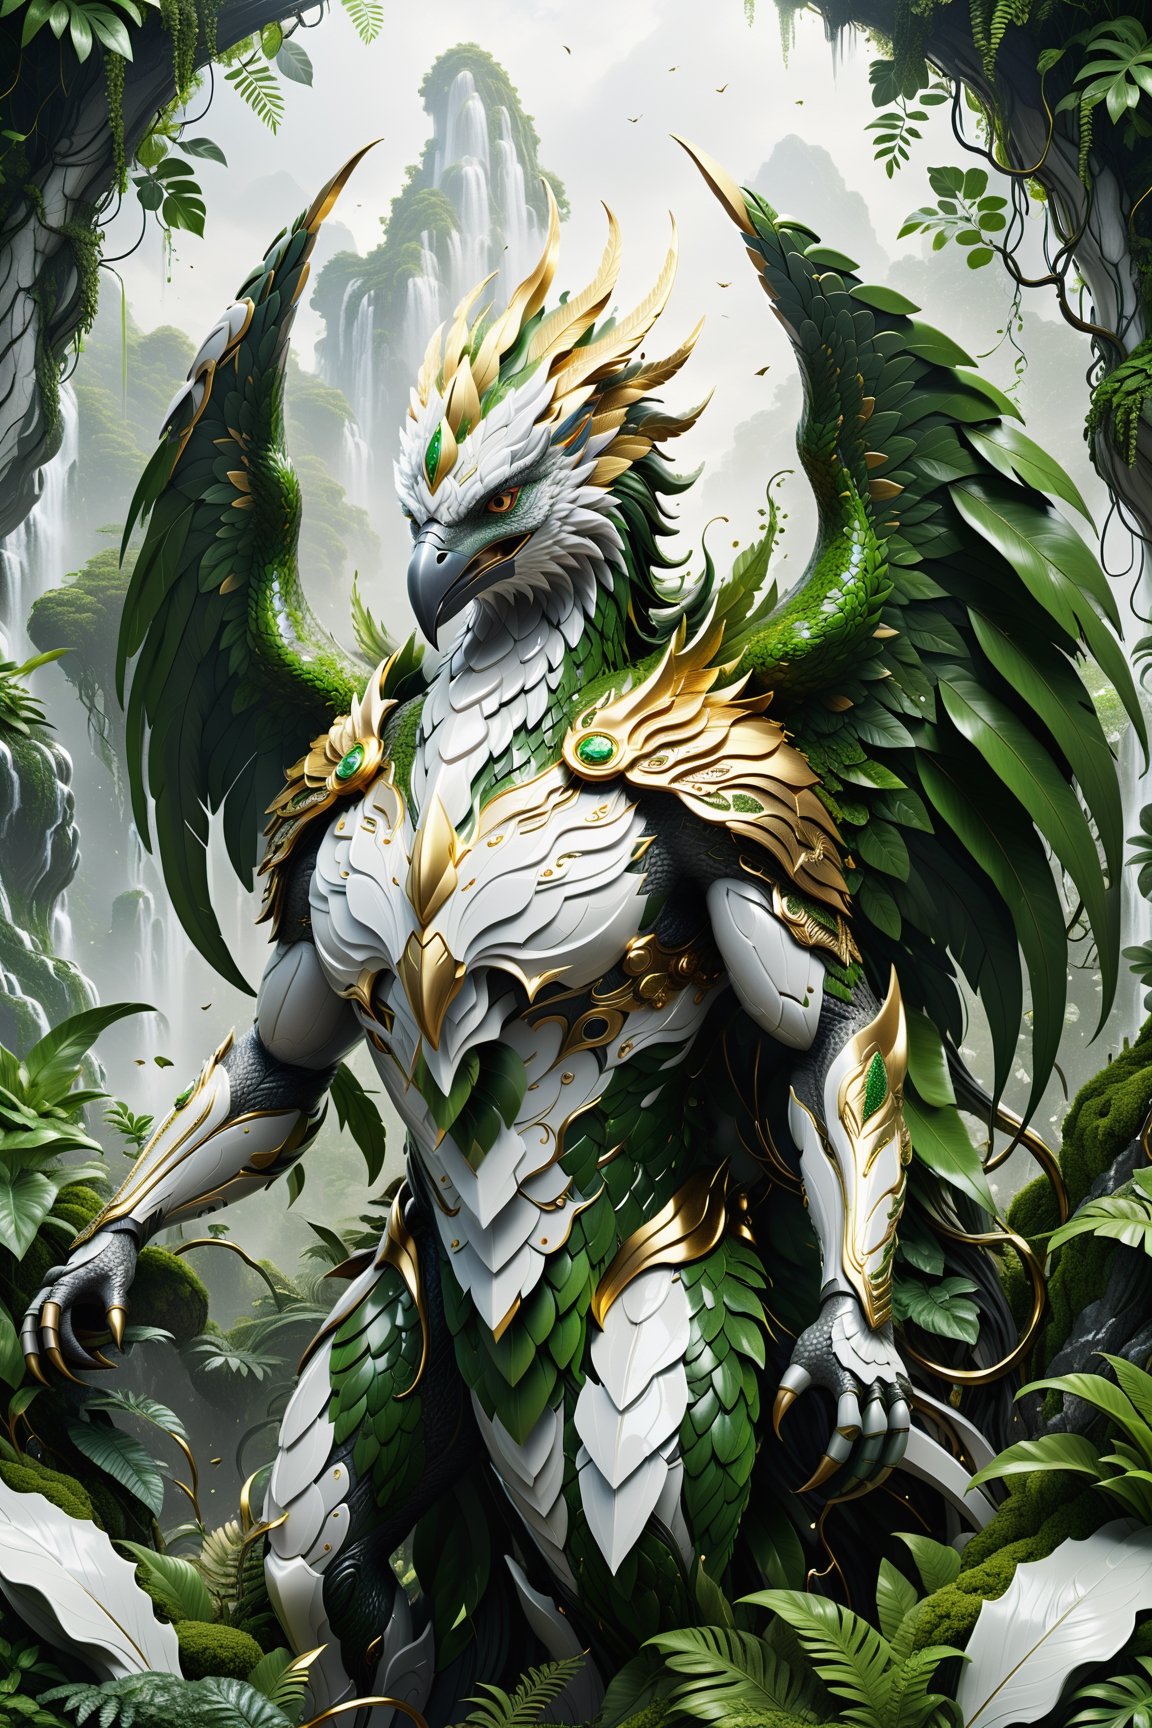 High definition photorealistic render of an incredible and mysterious futuristic mythical creature with scales, hair,  wings and feathers, in splosion monster with parametric shape and structure in the word, curved and fluid shapes in a thick jungle full of a lot of vegetation and trees with vines and rocks with moss, in white marble with intricate gold details, luxurious details and parametric architectural style in marble and metal, epic pose
​